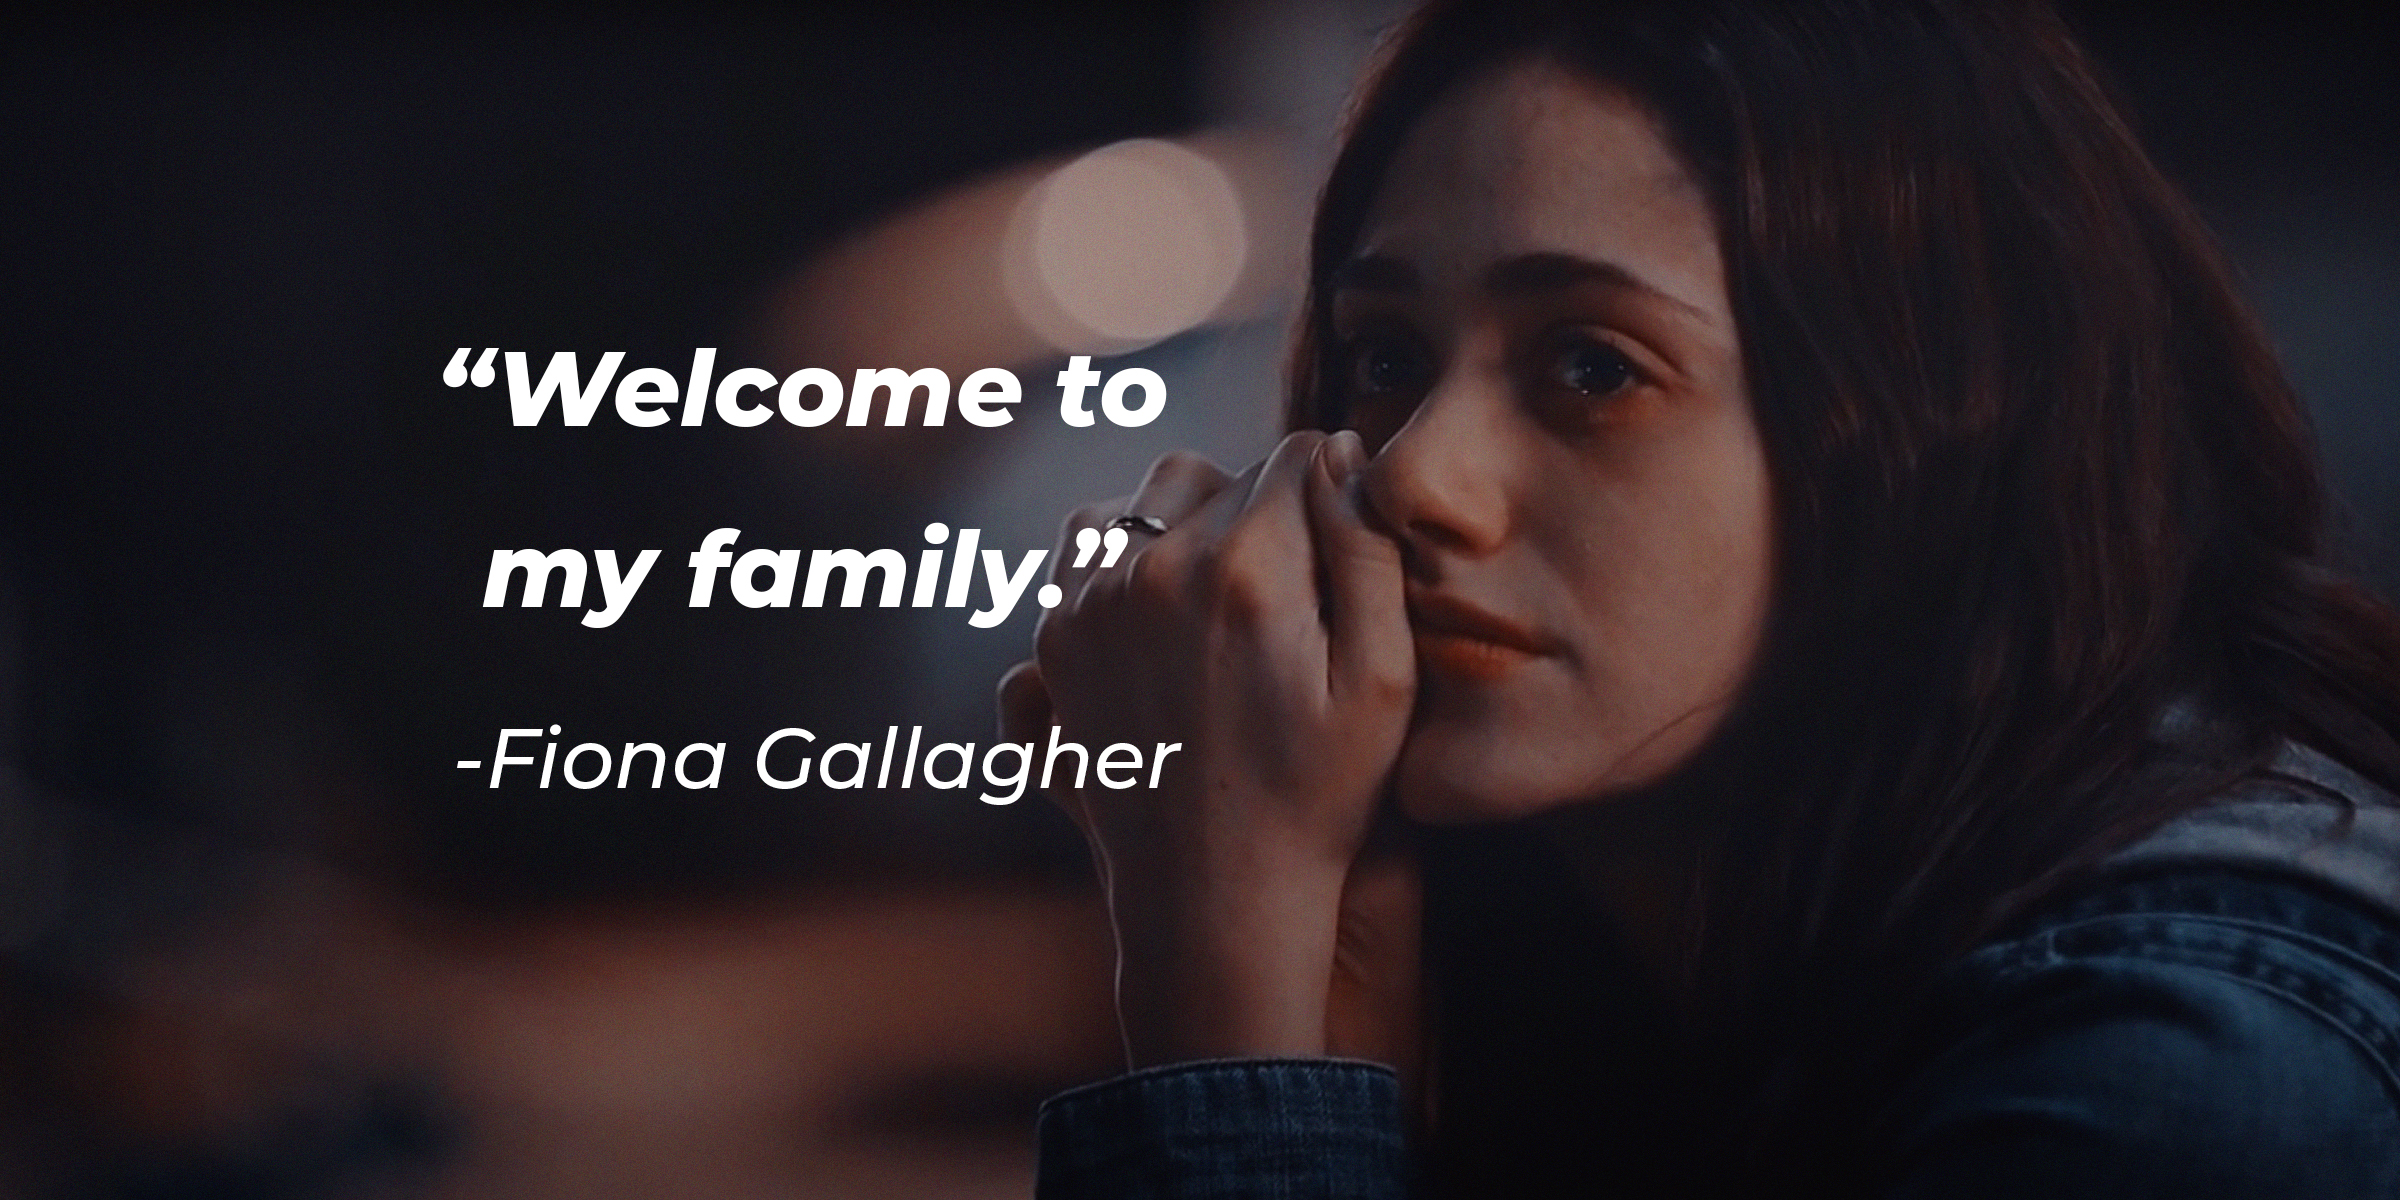 An image of Fiona Gallagher with her quote: “Welcome to my family.” | Source: facebook.com/ShamelessOnShowtime